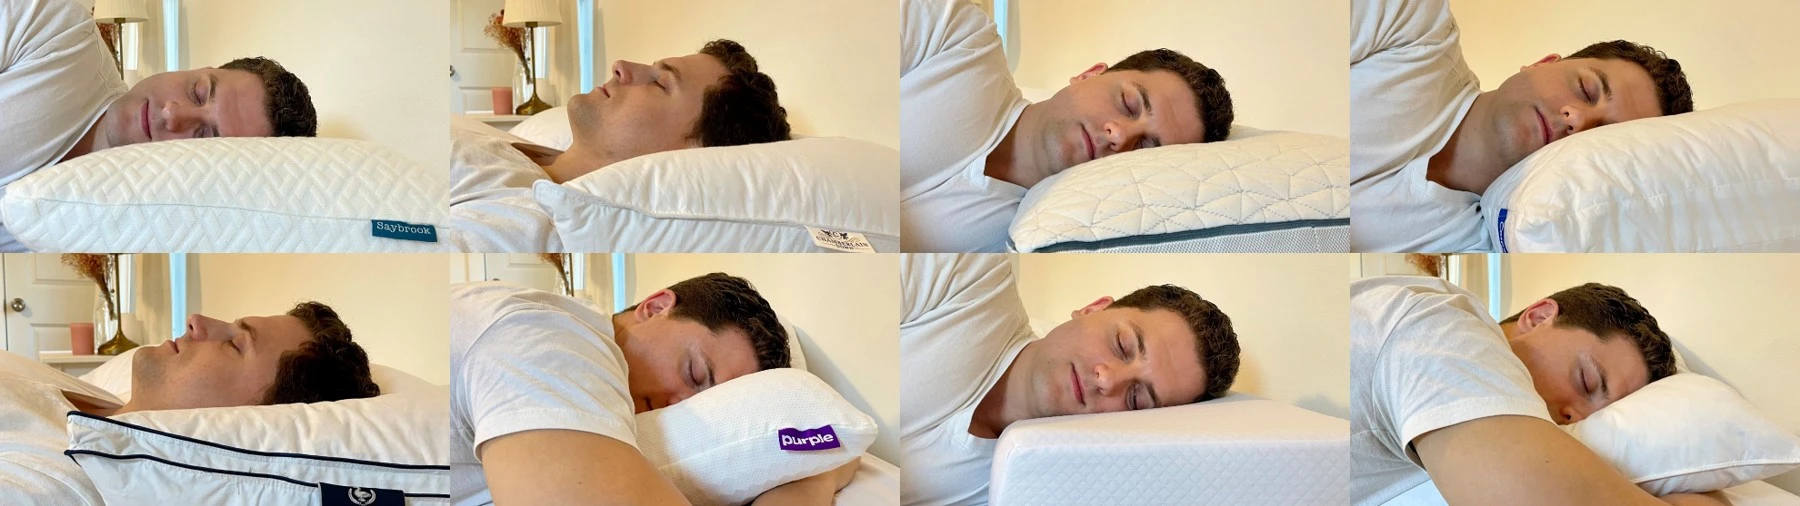 Best Pillows for Side Sleepers: Our Lab-Tested Picks